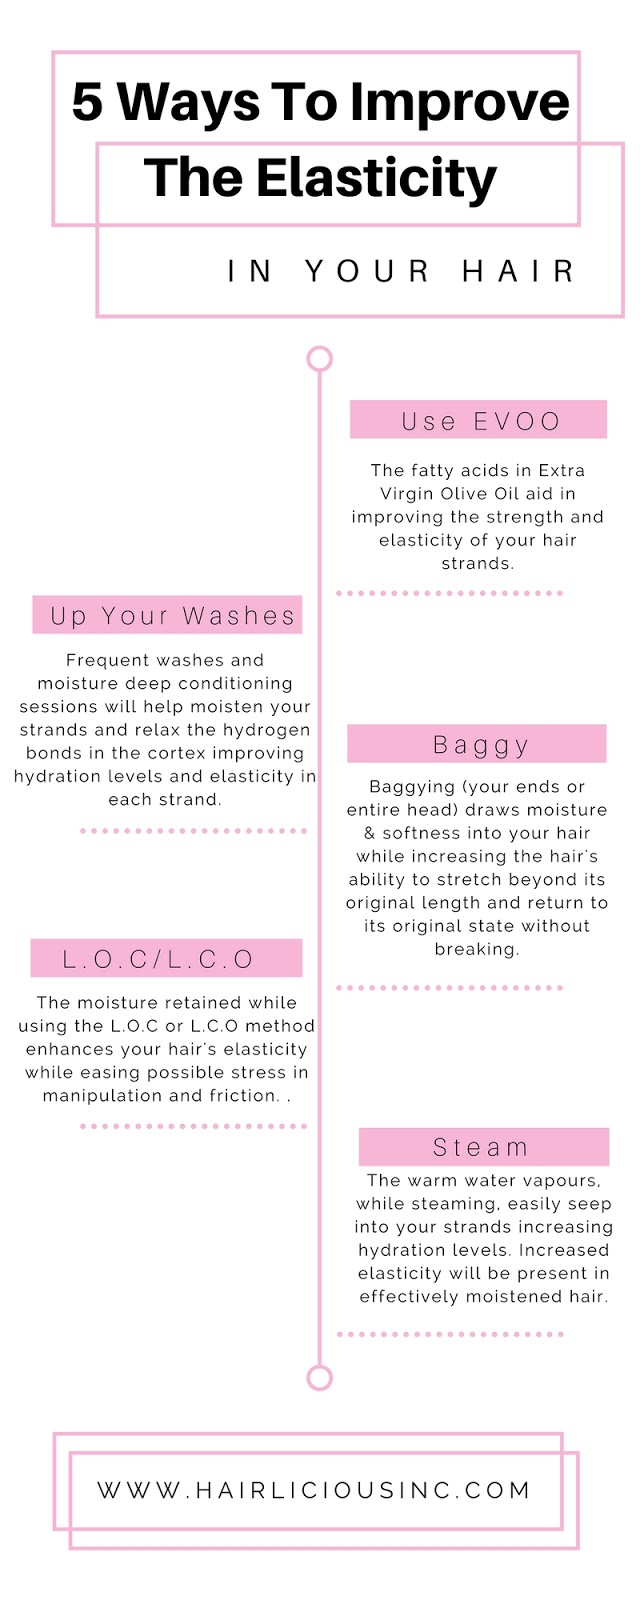 5 Ways To Improve The Elasticity In Your Hair - Hairlicious Inc.